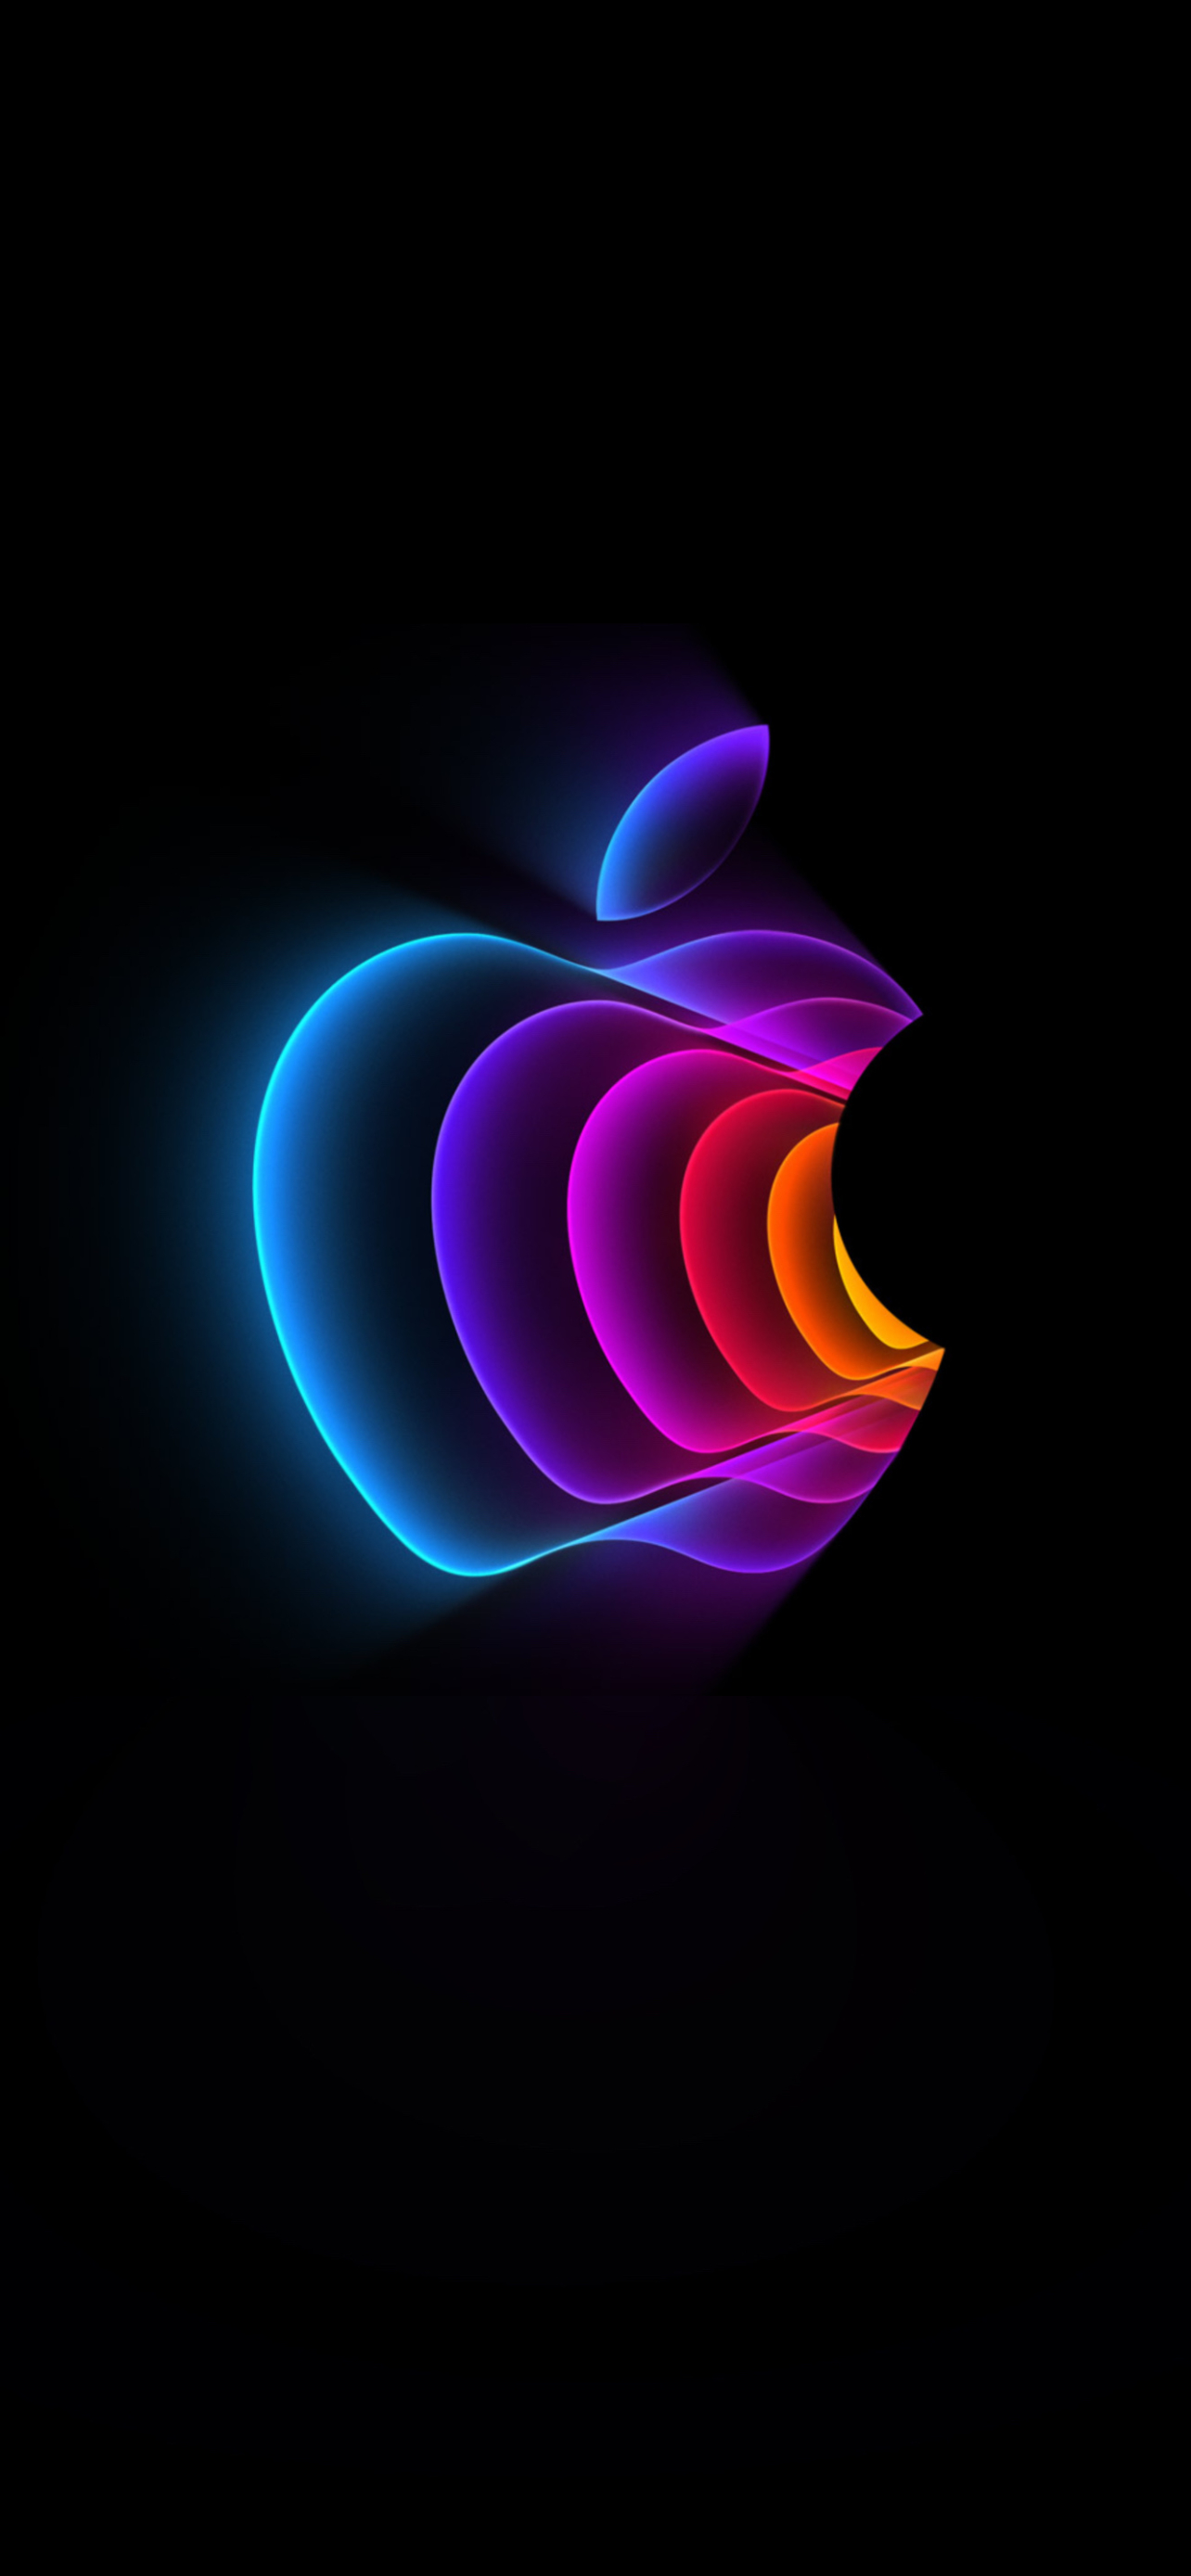 Apple "Peek Performance" March 2022 Event by AR72014